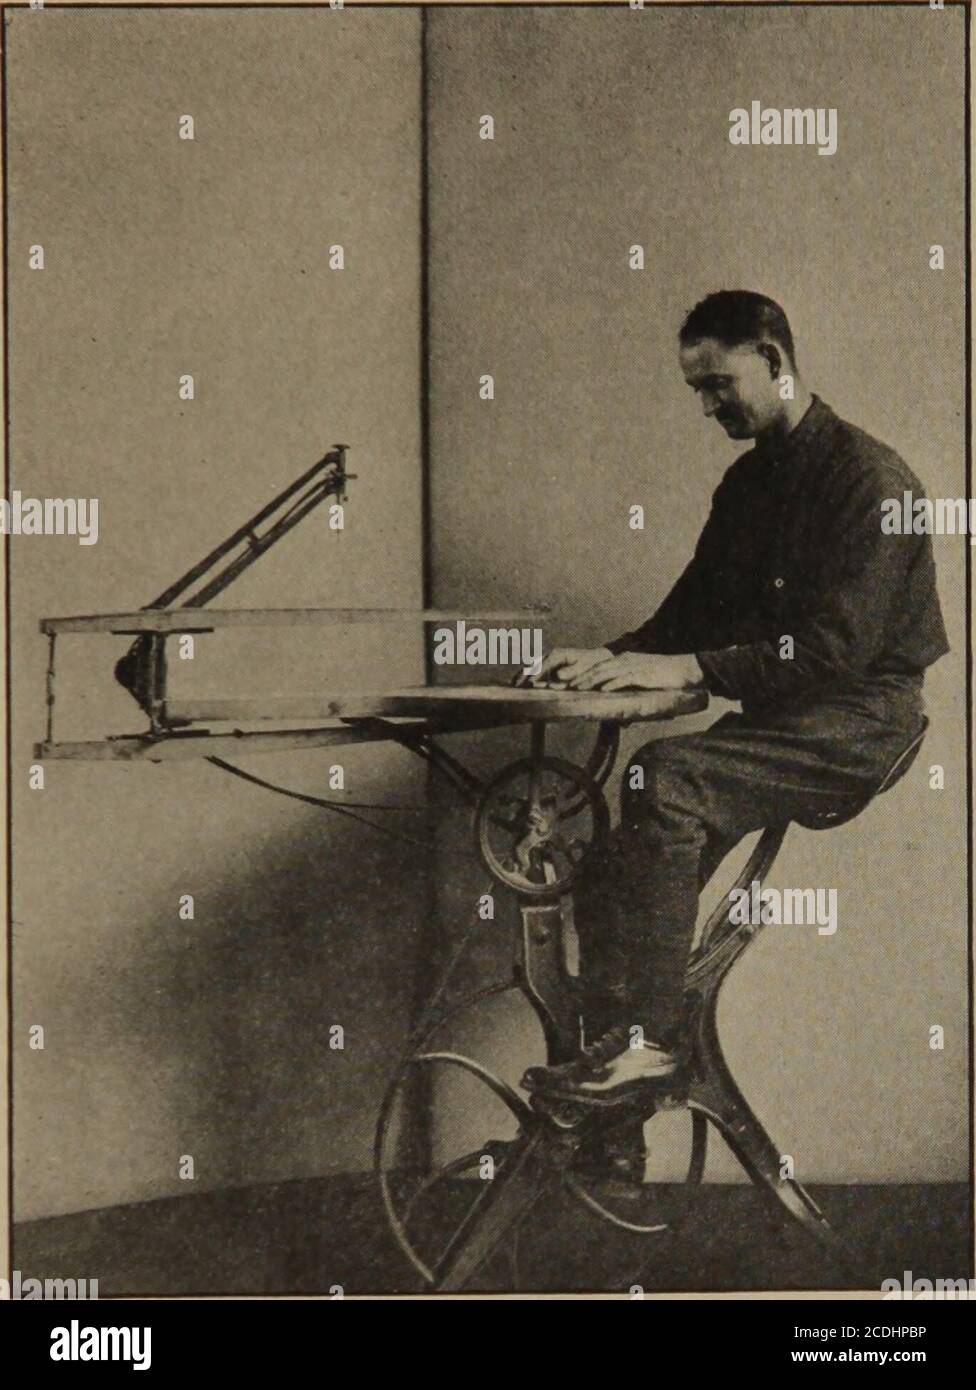 . Occupational therapy applied to restoration of function of disabled joints . Plate 41 Specially adapted machine for long or shortstroke for flexion-extension of knee andankle. Pvt. L. has little movement and isusing short stroke. APPLIED TO RESTORATION OF MOVEMENT 45 III. Wrist. Carpentry: Abduction (and adduction) in hammering withlight hammer, using lathe. Machine shop: No special machine, butvariety of tools. Engraving: Abduction in turning plate, and ad-duction in returning to initial posiion in making curves in work-ing on large unmounted plate, slight abduction in dotting. Hug weav-. P Stock Photo